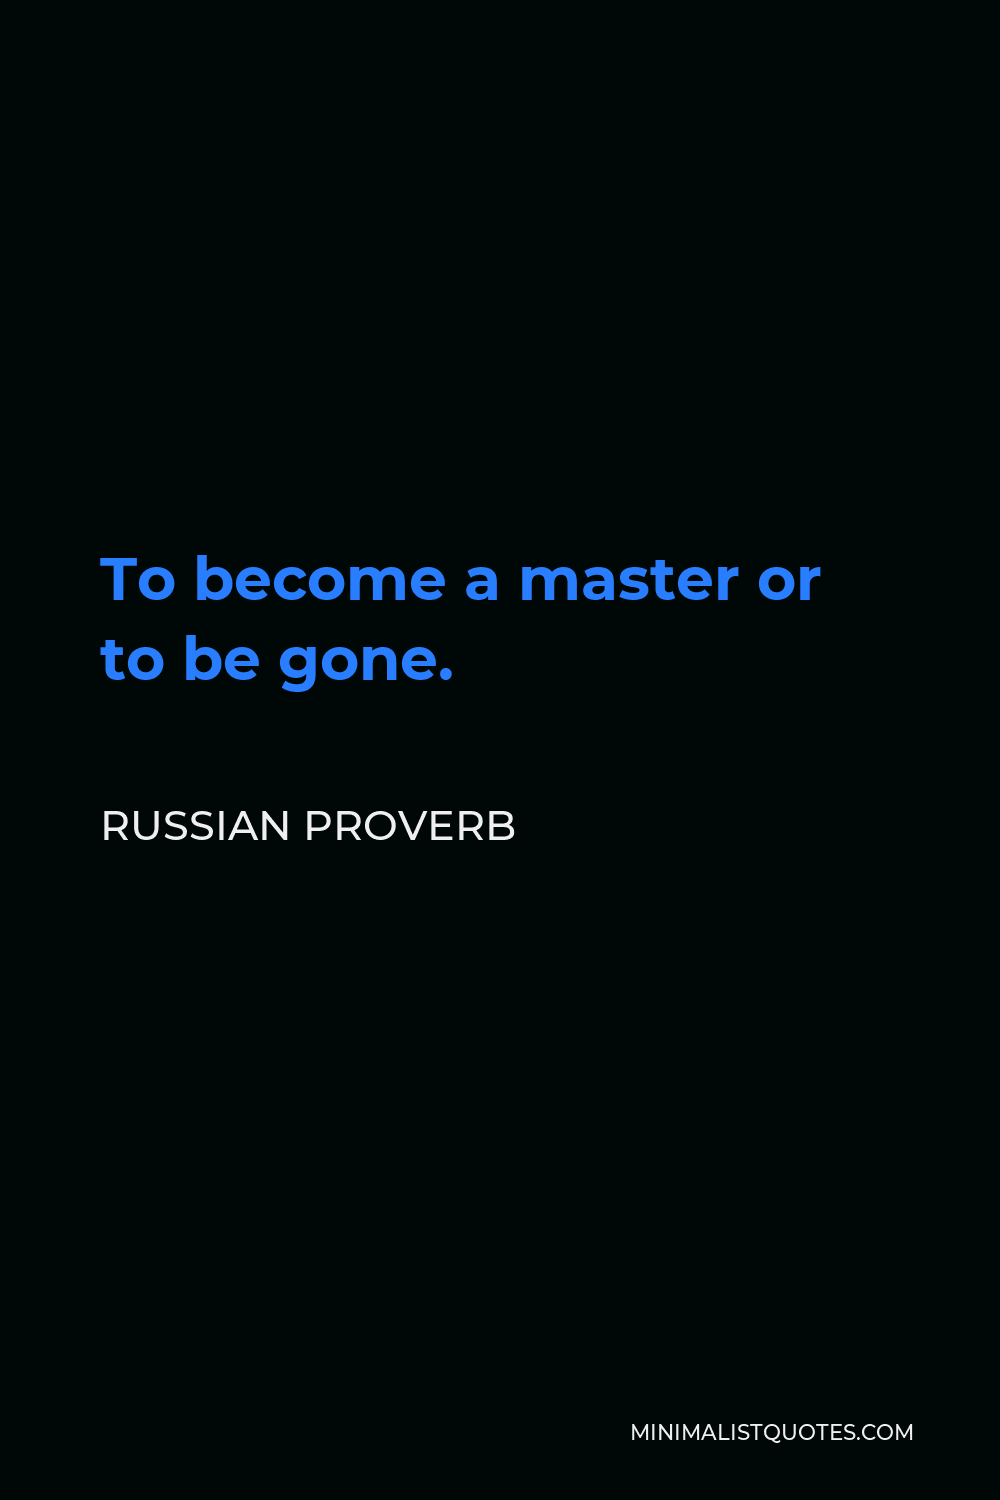 Russian Proverb Quote - To become a master or to be gone.